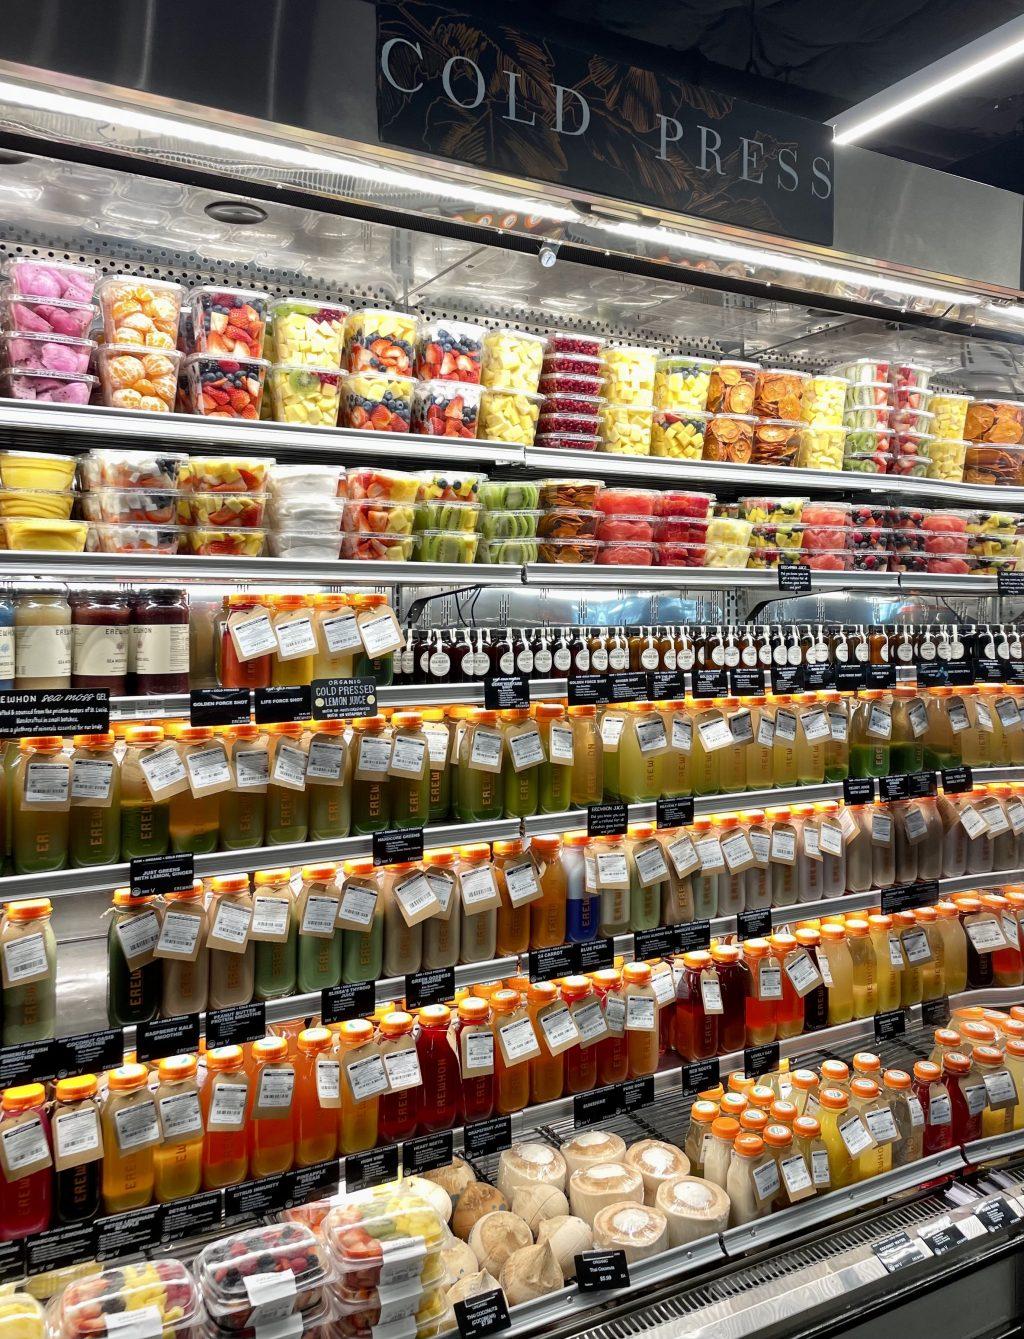 Erewhon's fully stocked cold case features a range of nutrient dense fresh pressed juices and smoothies as well as pre-cut fresh fruit.  The shop's freshly squeezed and fresh juices have become an internet sensation after being promoted by numerous online influencers, The New York Times reports.